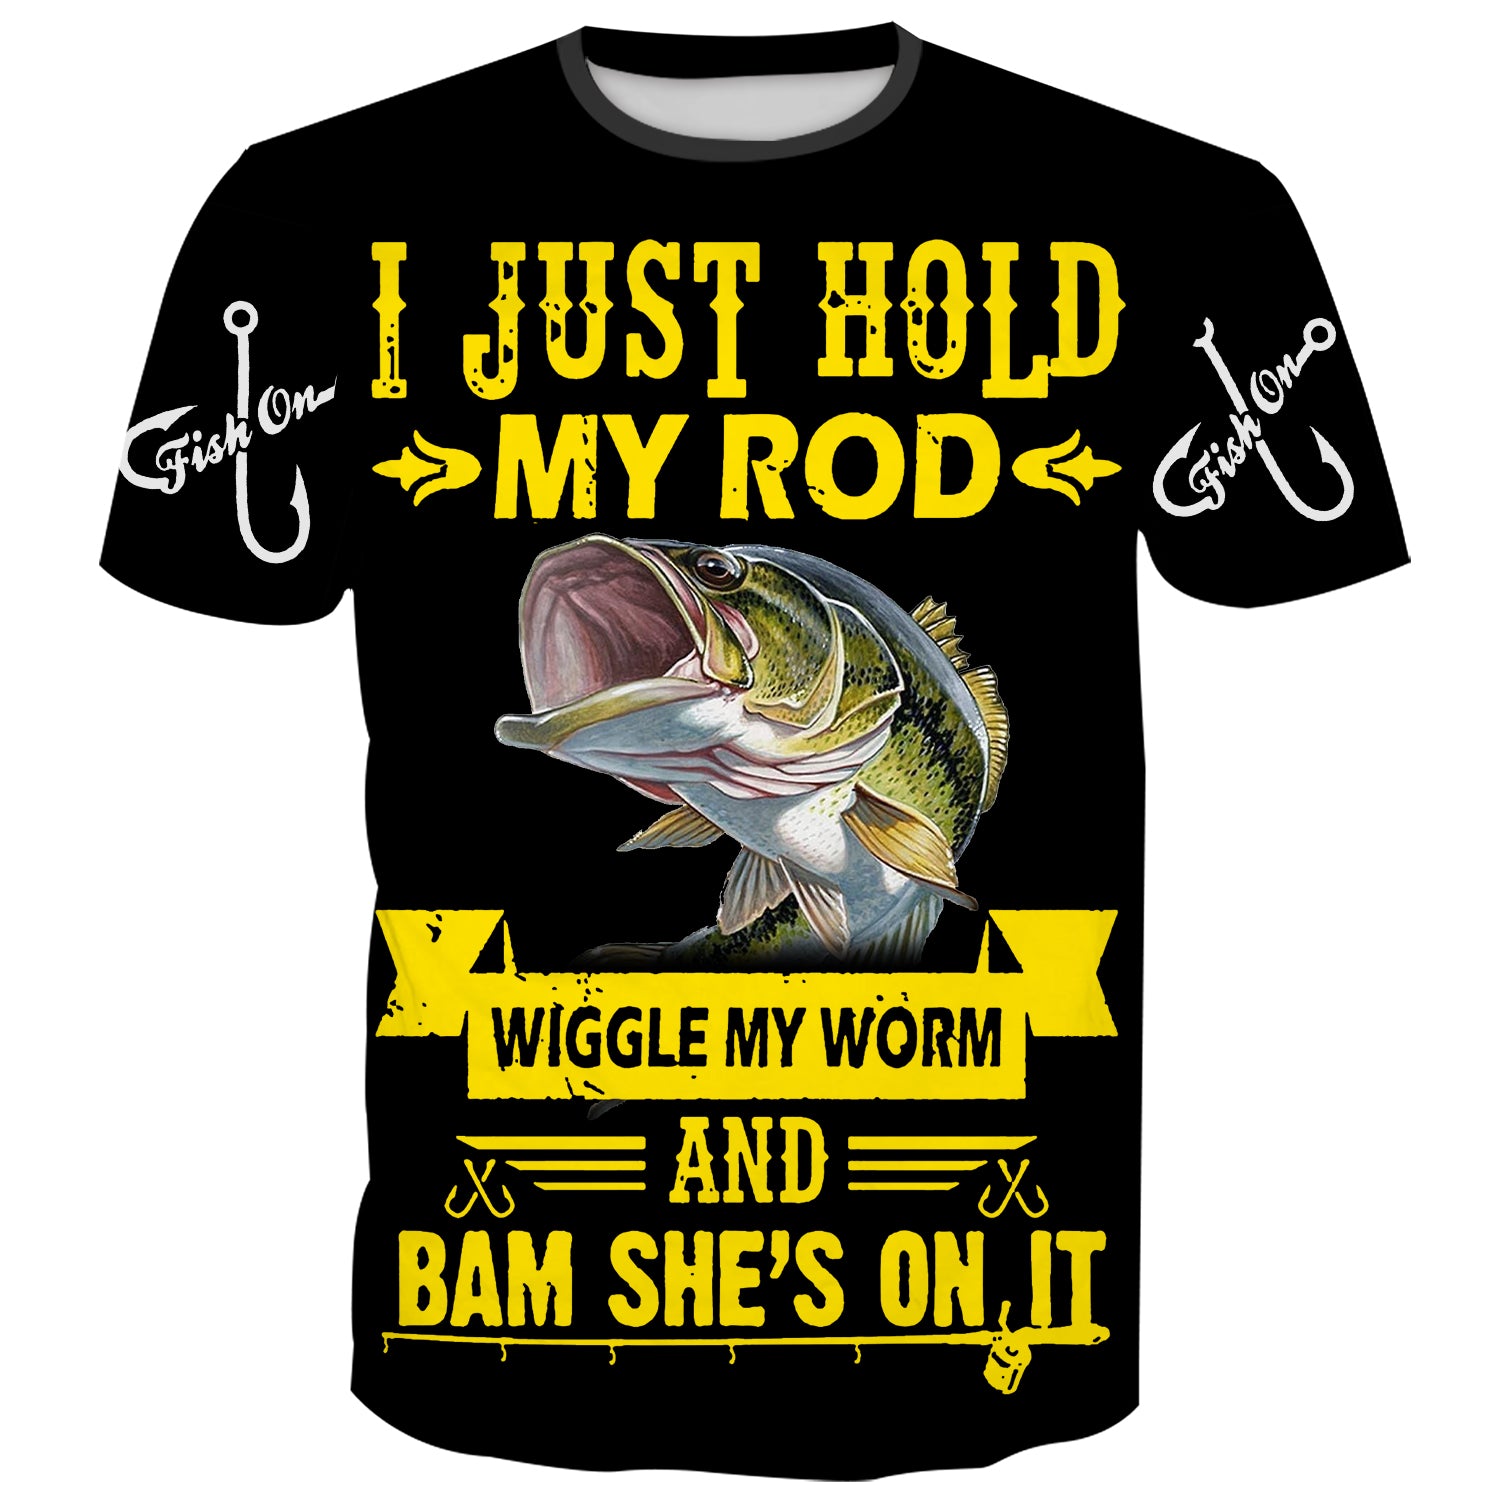 I just hold my rod wiggle my worm and bam she's on it - T-Shirt